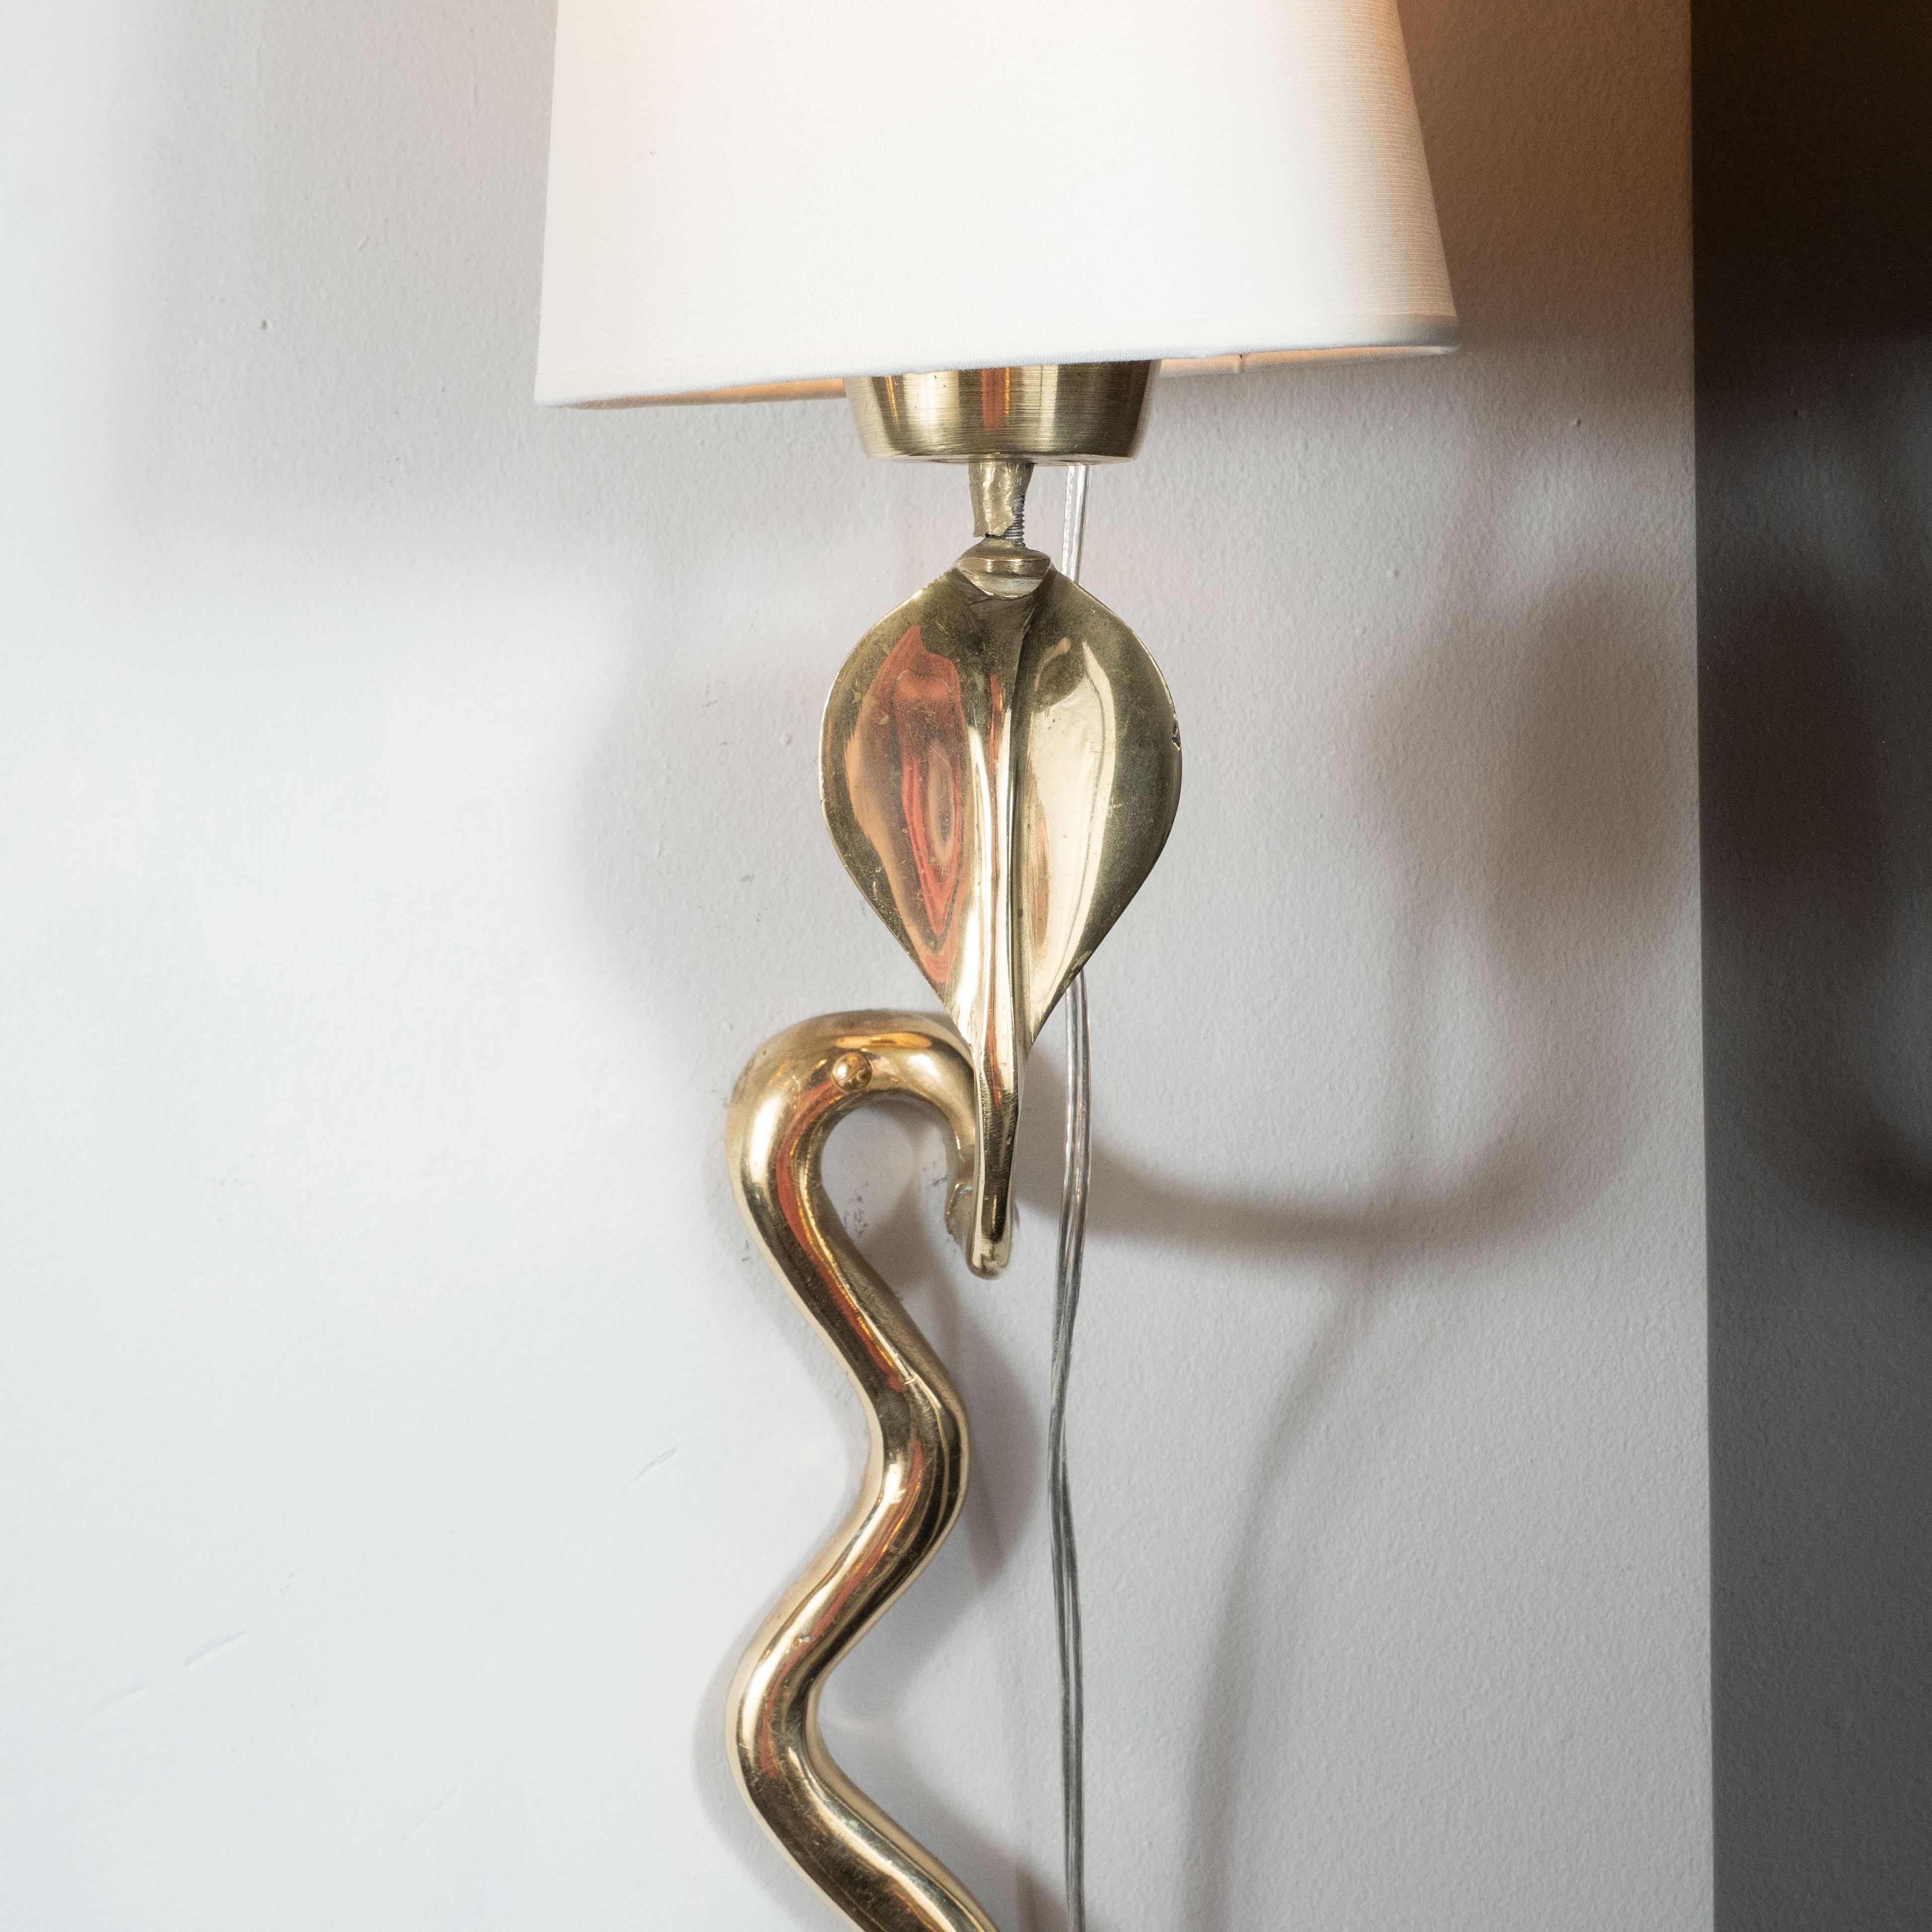 This stunning pair of Mid-Century Modern brass sconces were realized in the United States, circa 1960. They feature stylized interpretations of cobra snakes offering sinuously curved cylindrical forms that taper to its tale representing the